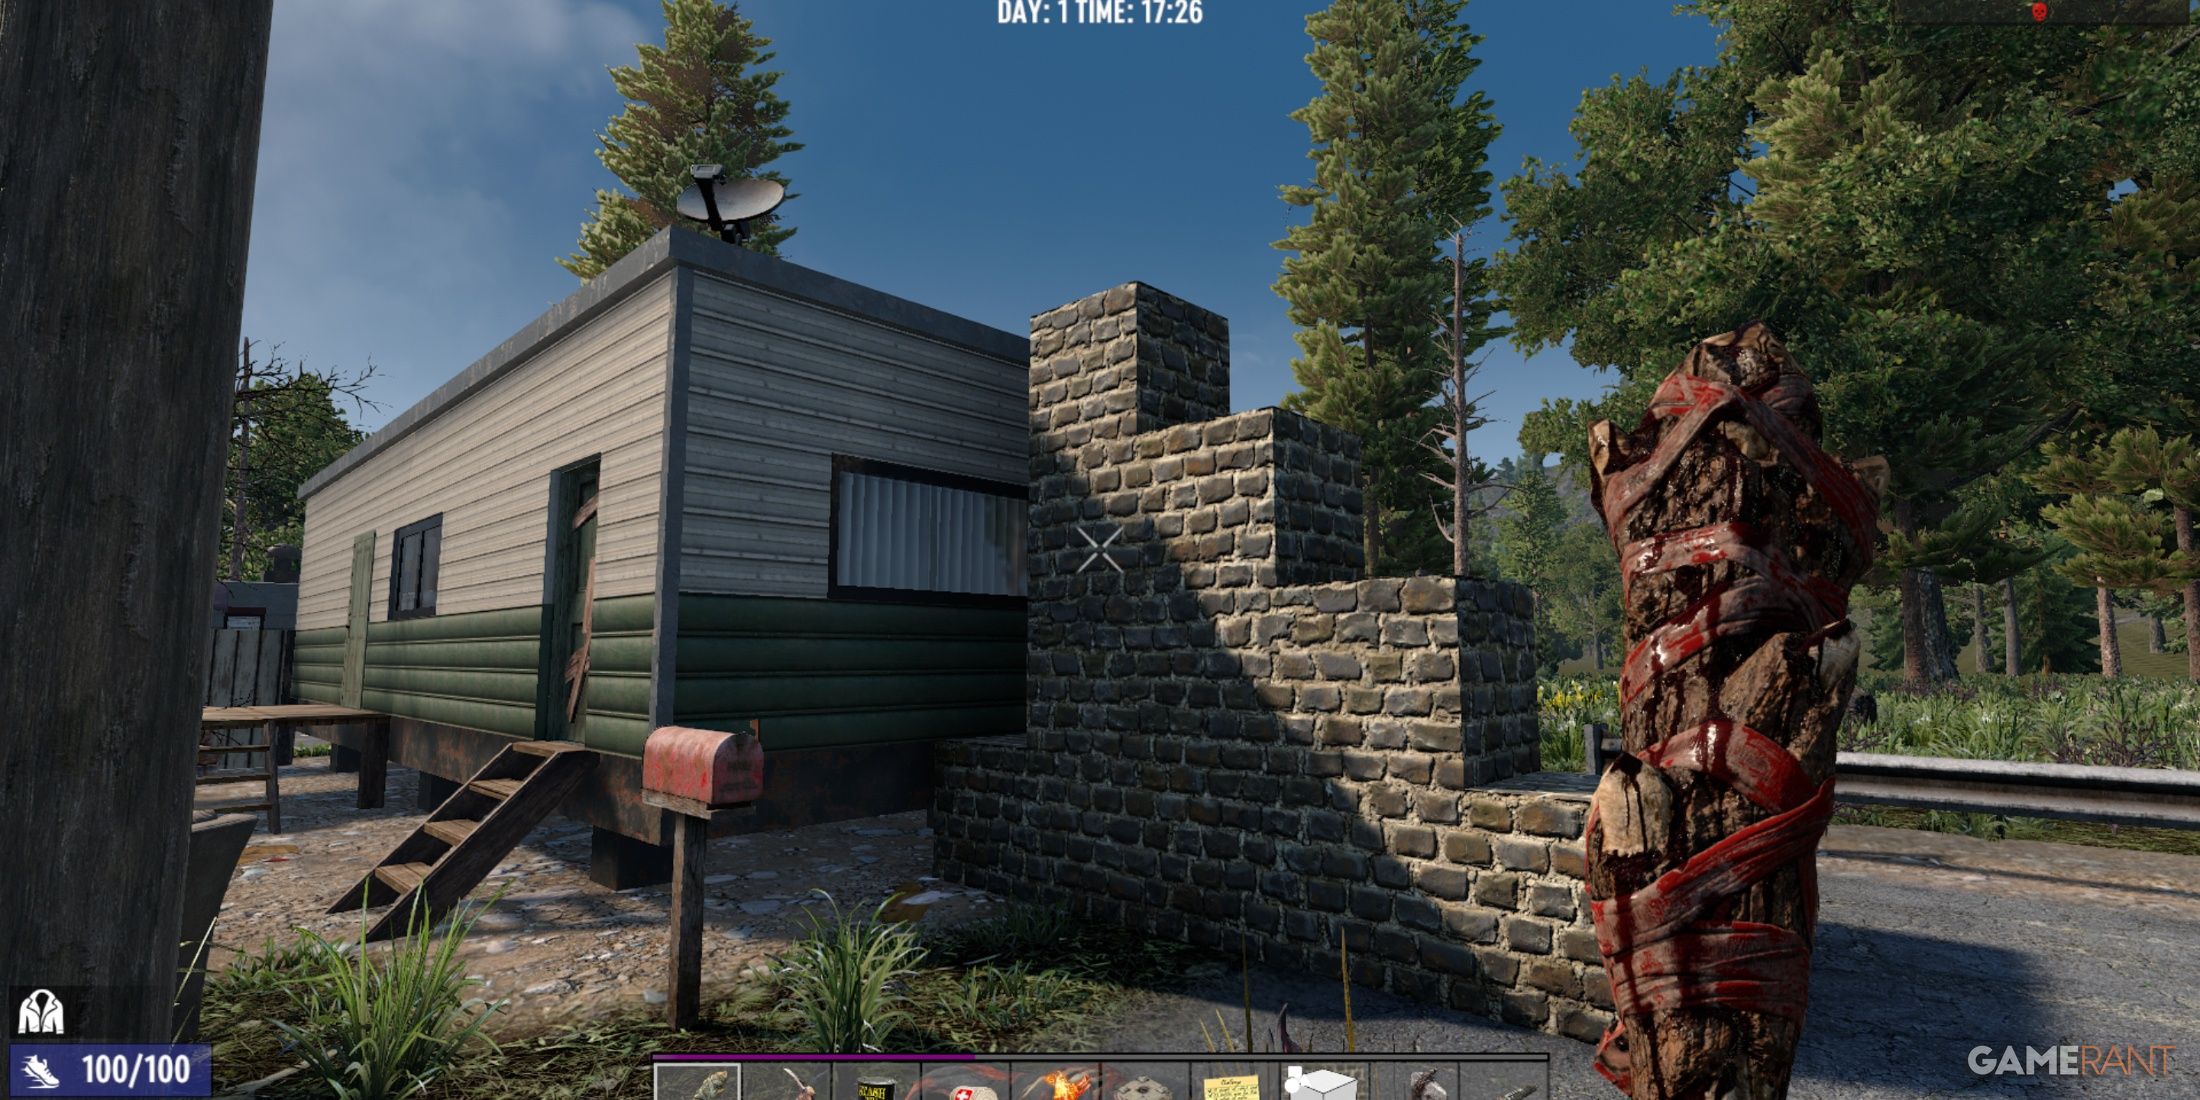 Trailer Park Roof Base In 7 Days To Die